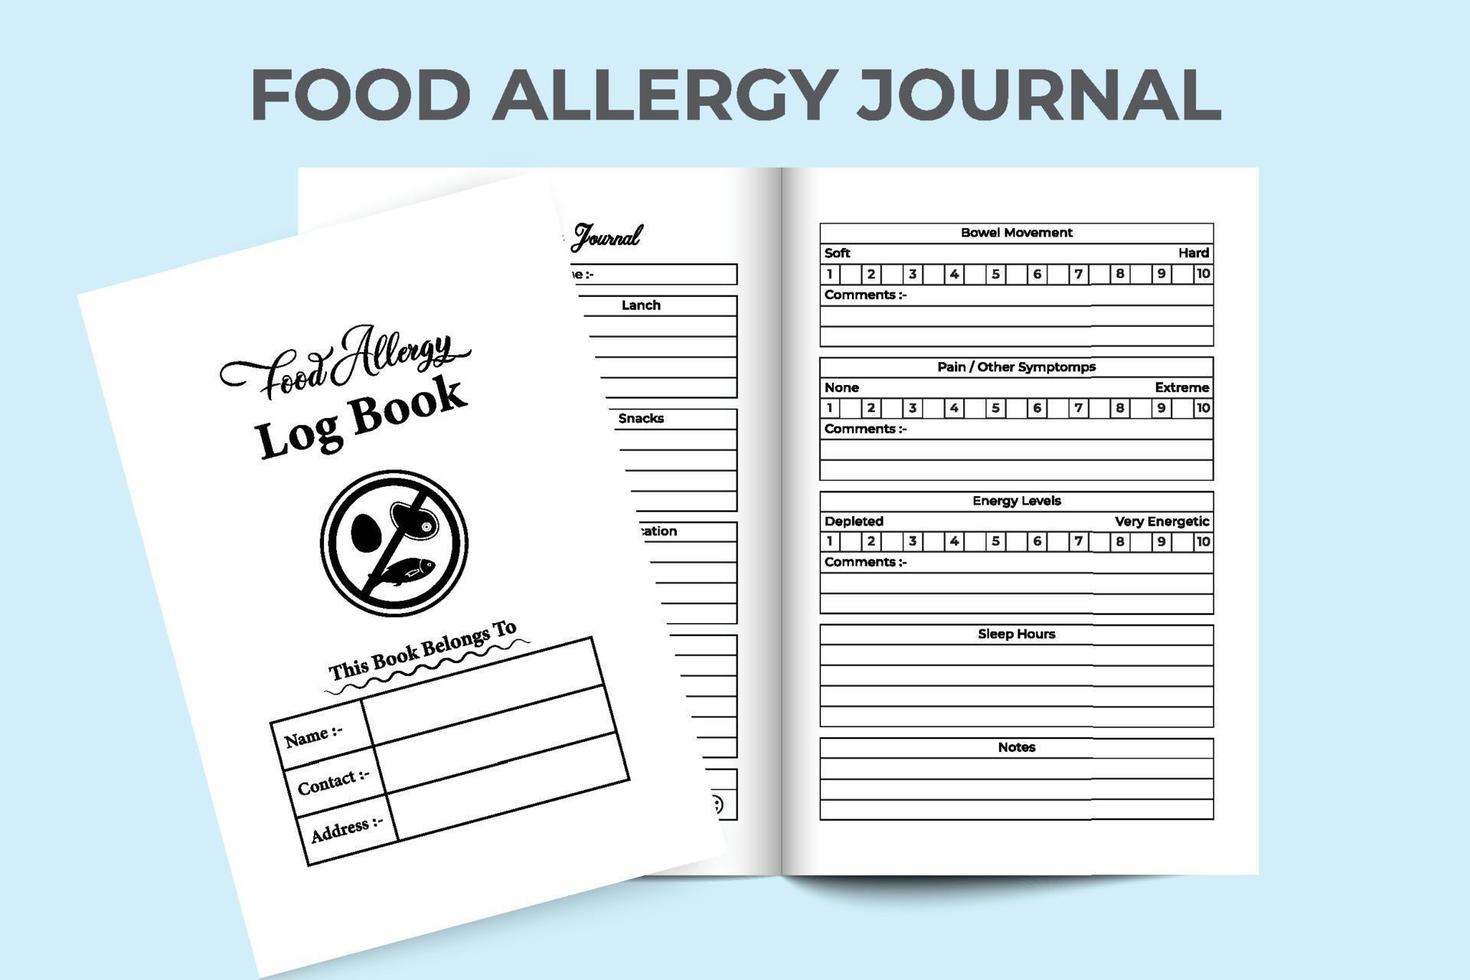 Food allergy notebook interior. Daily food routine and allergy symptoms checker journal template. Interior of a logbook. Food allergy medication notebook and pain tracker journal. vector